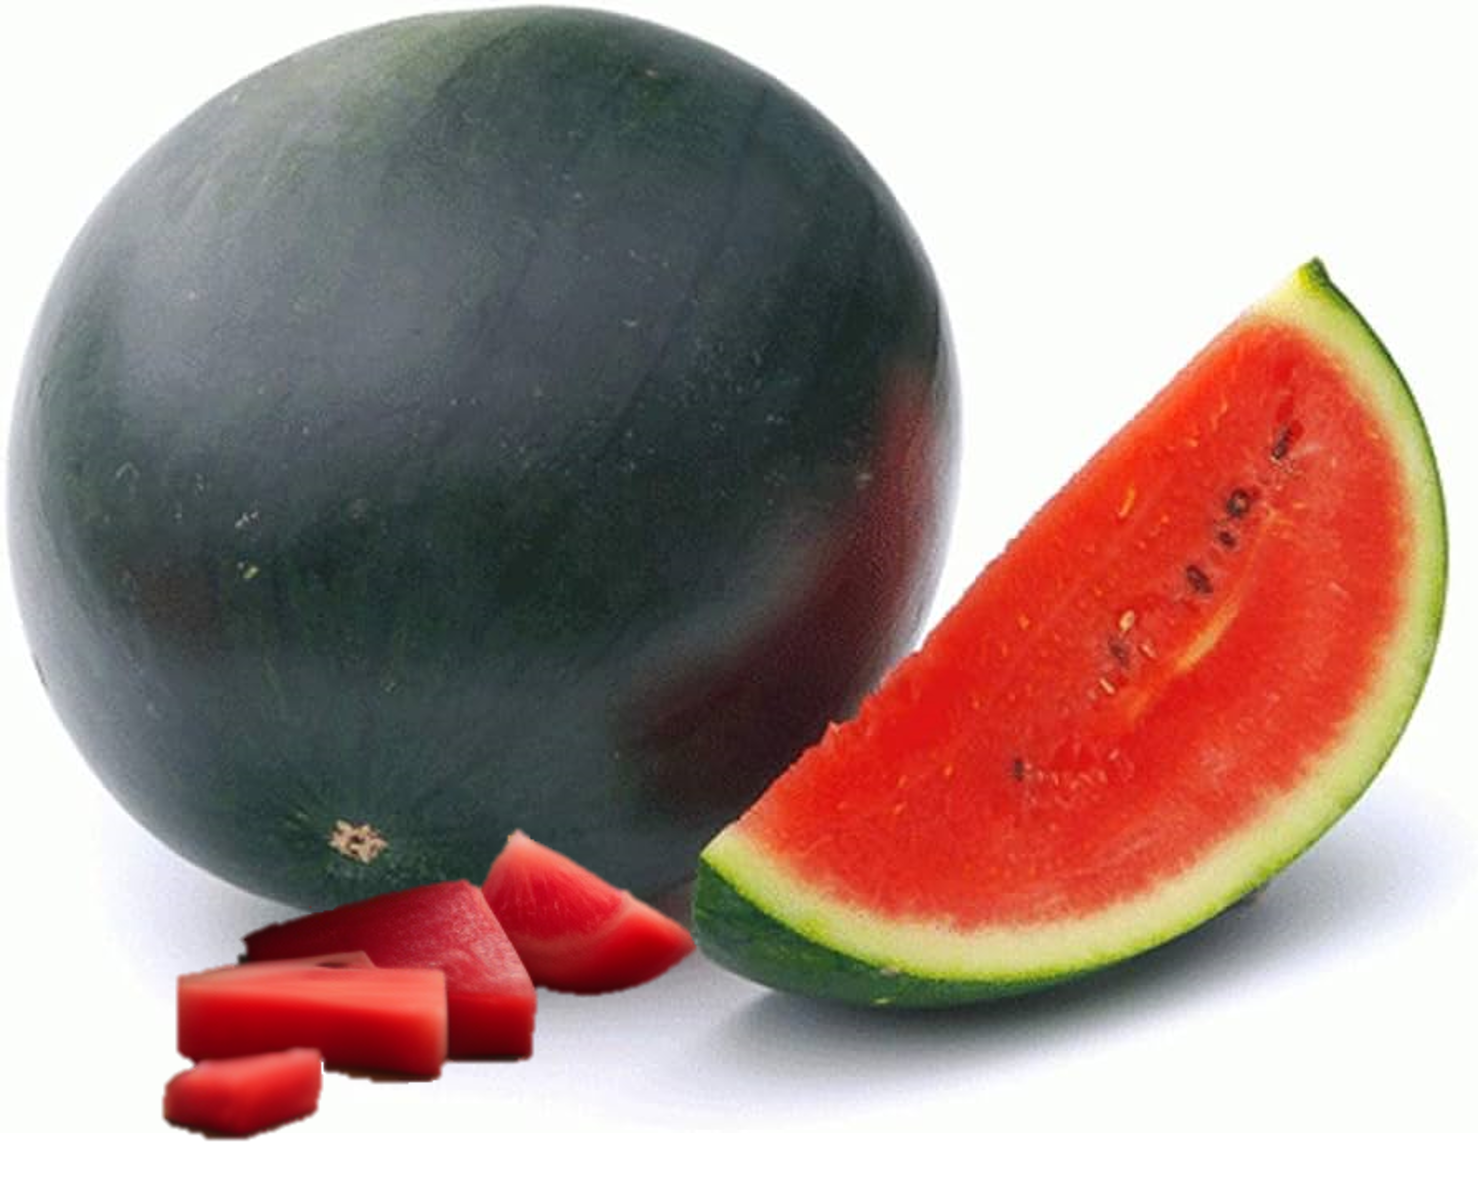 Watermelon Sugar Baby Seeds Small Miniature Watermelon Harvested From Vegetable Garden